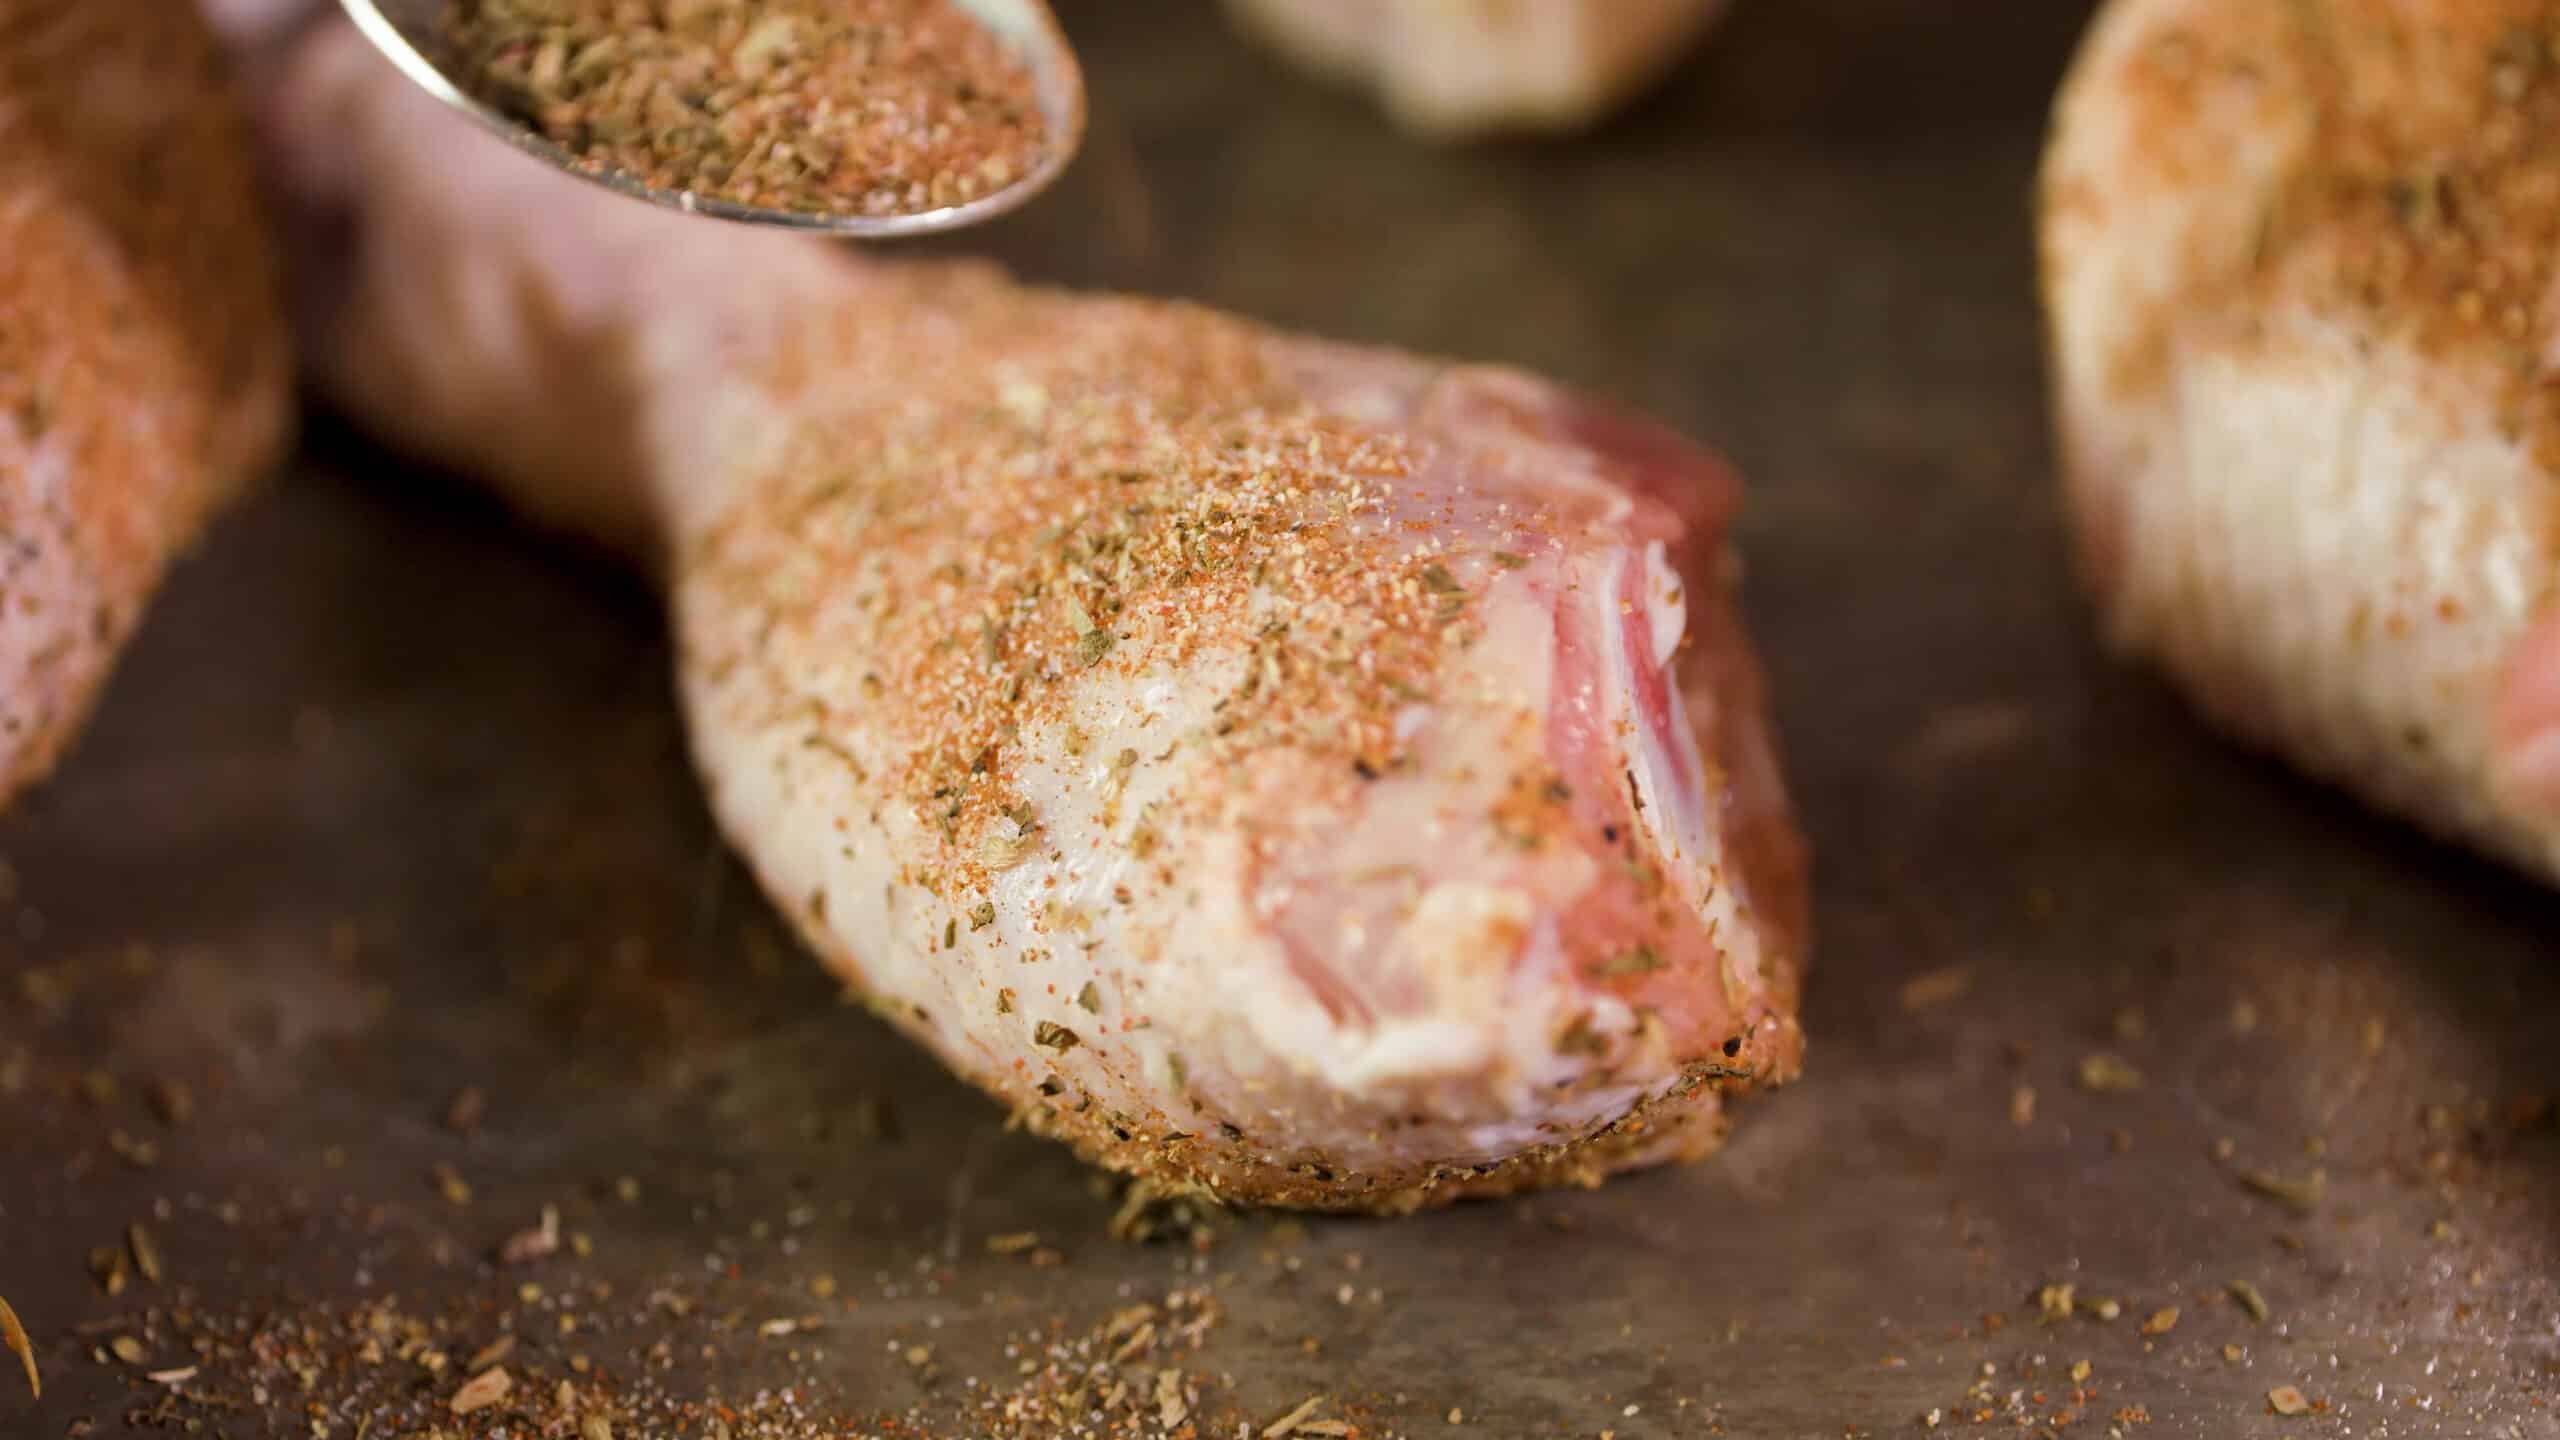 Close-up view of a single drumstick covered in dry cajun spices sprinkled from a metal spoon.